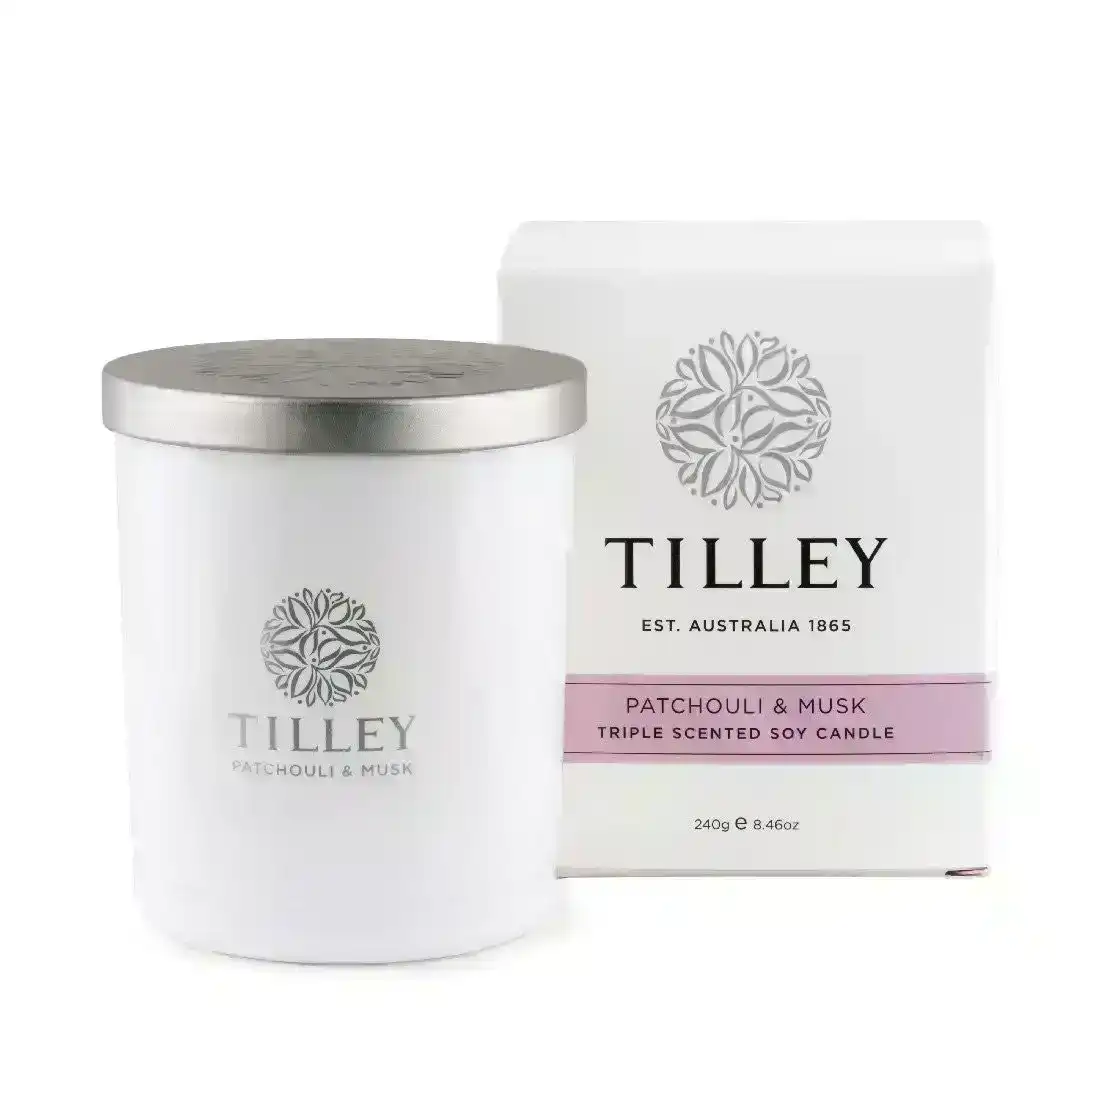 Tilley Classic White - Soy Candle 240g - Patchouli & Musk